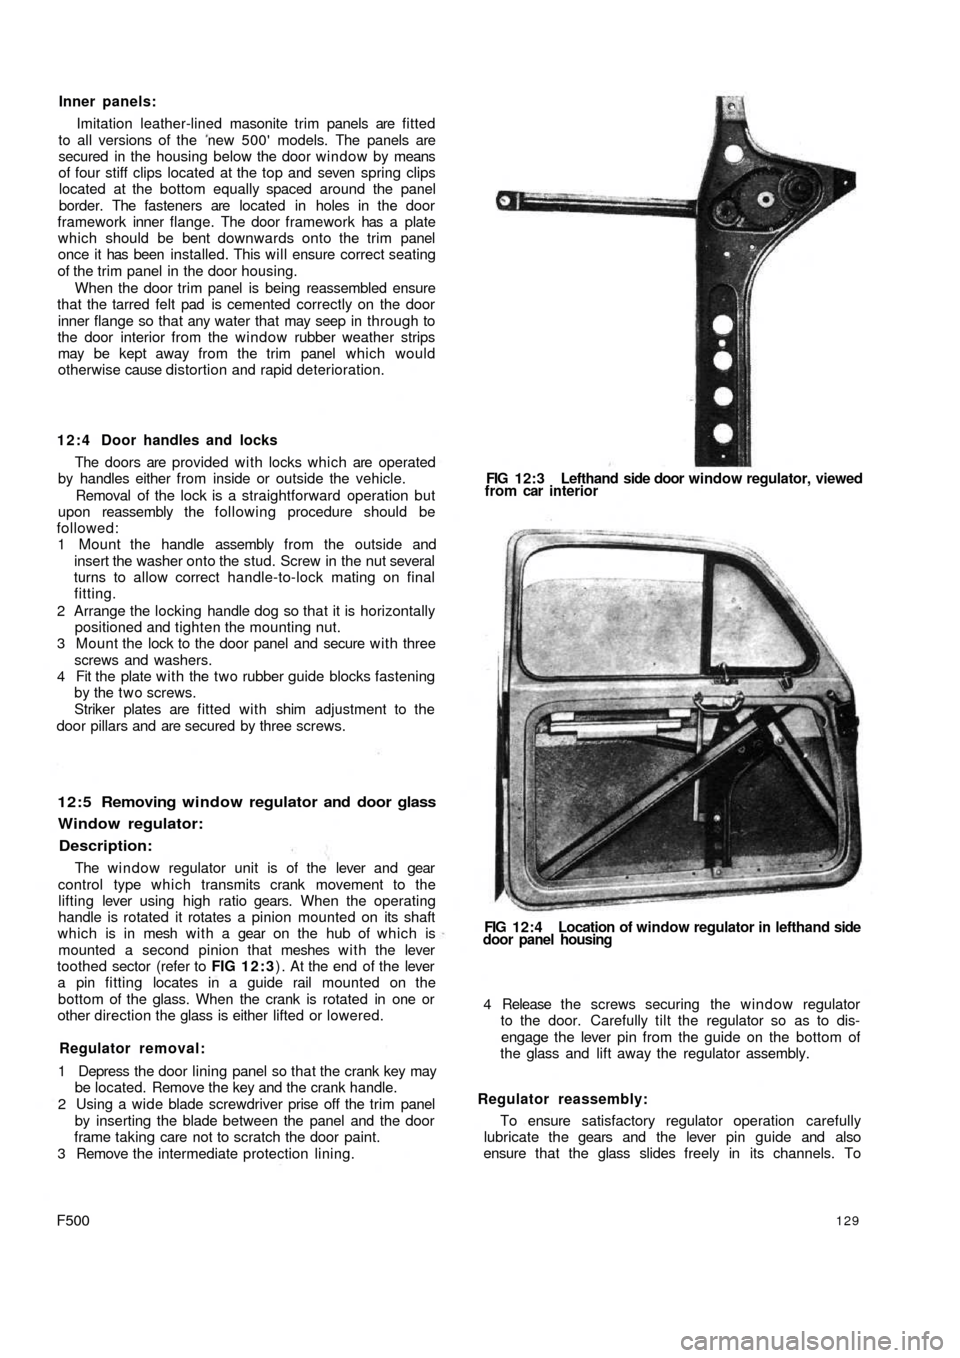 FIAT 500 1966 1.G Workshop Manual Inner panels:
Imitation leather-lined masonite trim panels are fitted
to all versions of the  new 500 models. The panels are
secured in the housing below the door window by means
of four stiff clips 